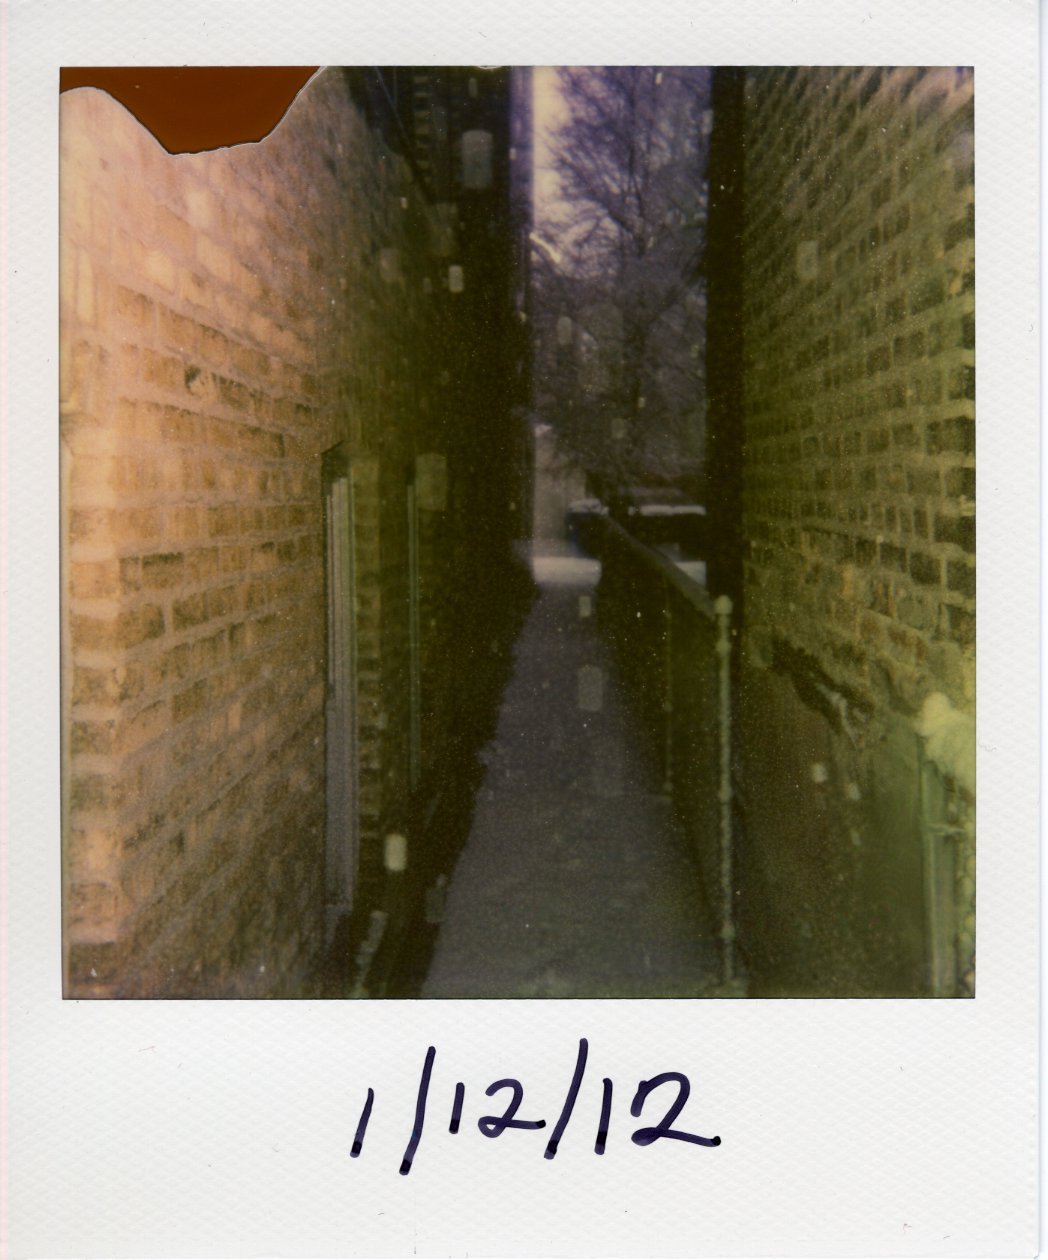 Alleyway / The Year’s First Snowfall 